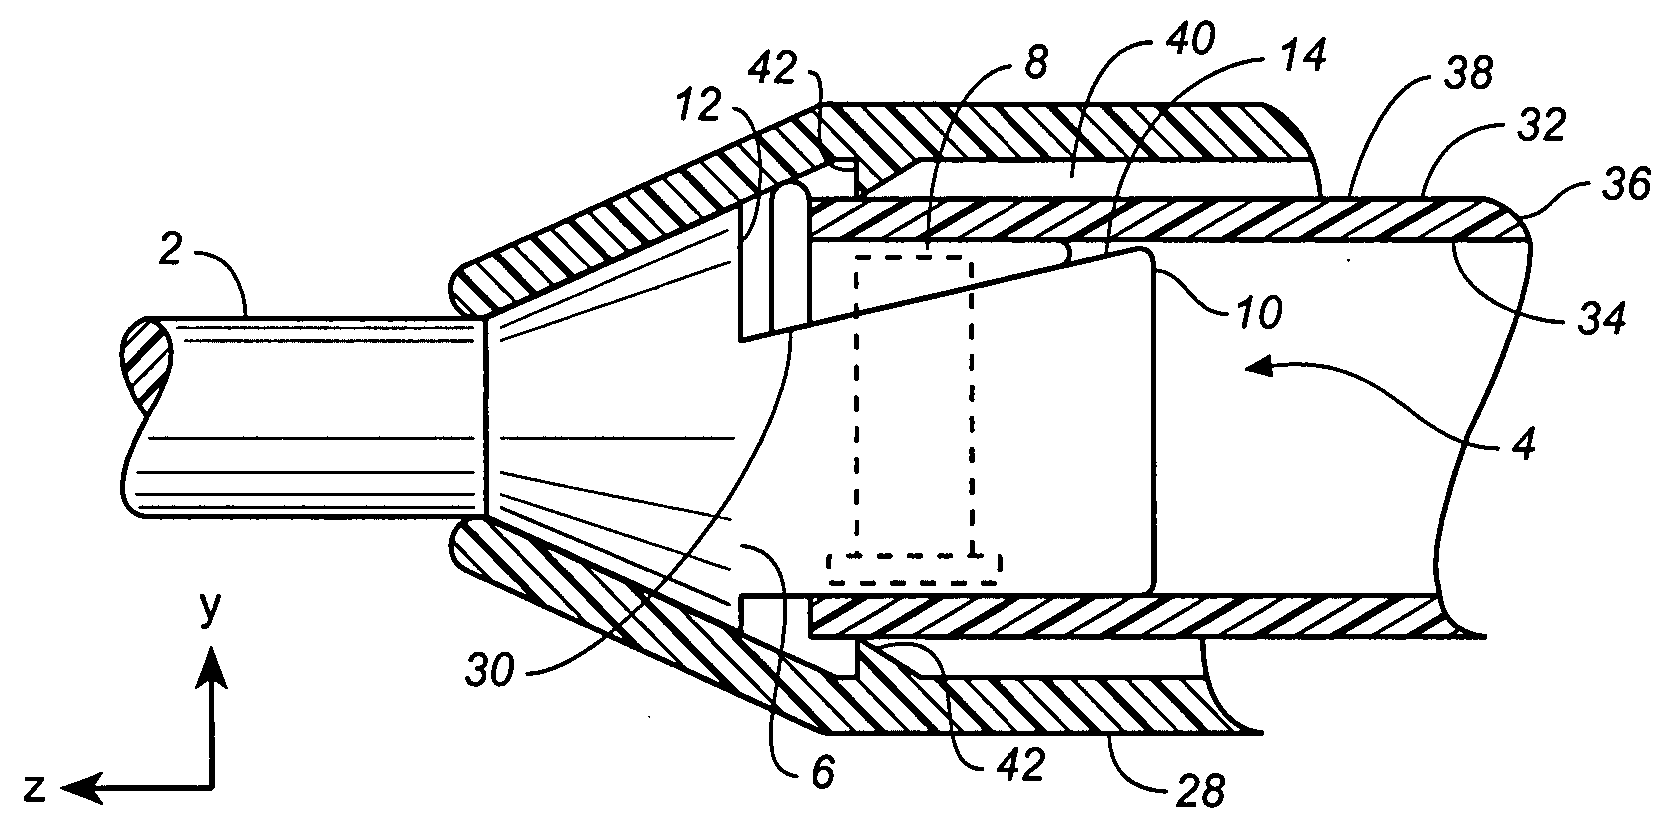 Tunneler with an expandable attachment mechanism